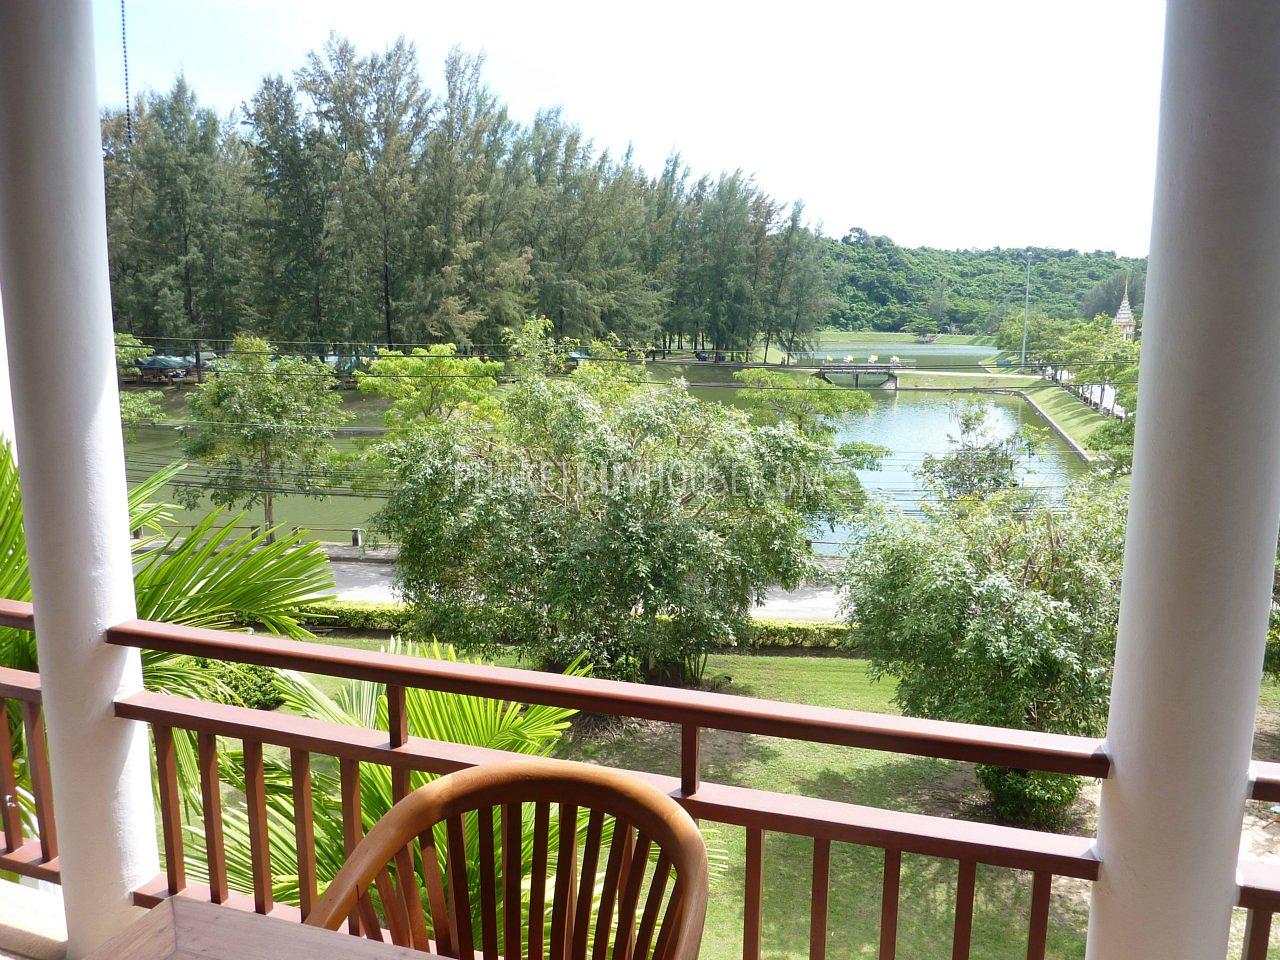 NAI2456: Freehold: Very nice 2 bedr. apartment (top floor), fully furnished, near beautiful Nai Harn Beach. Фото #30